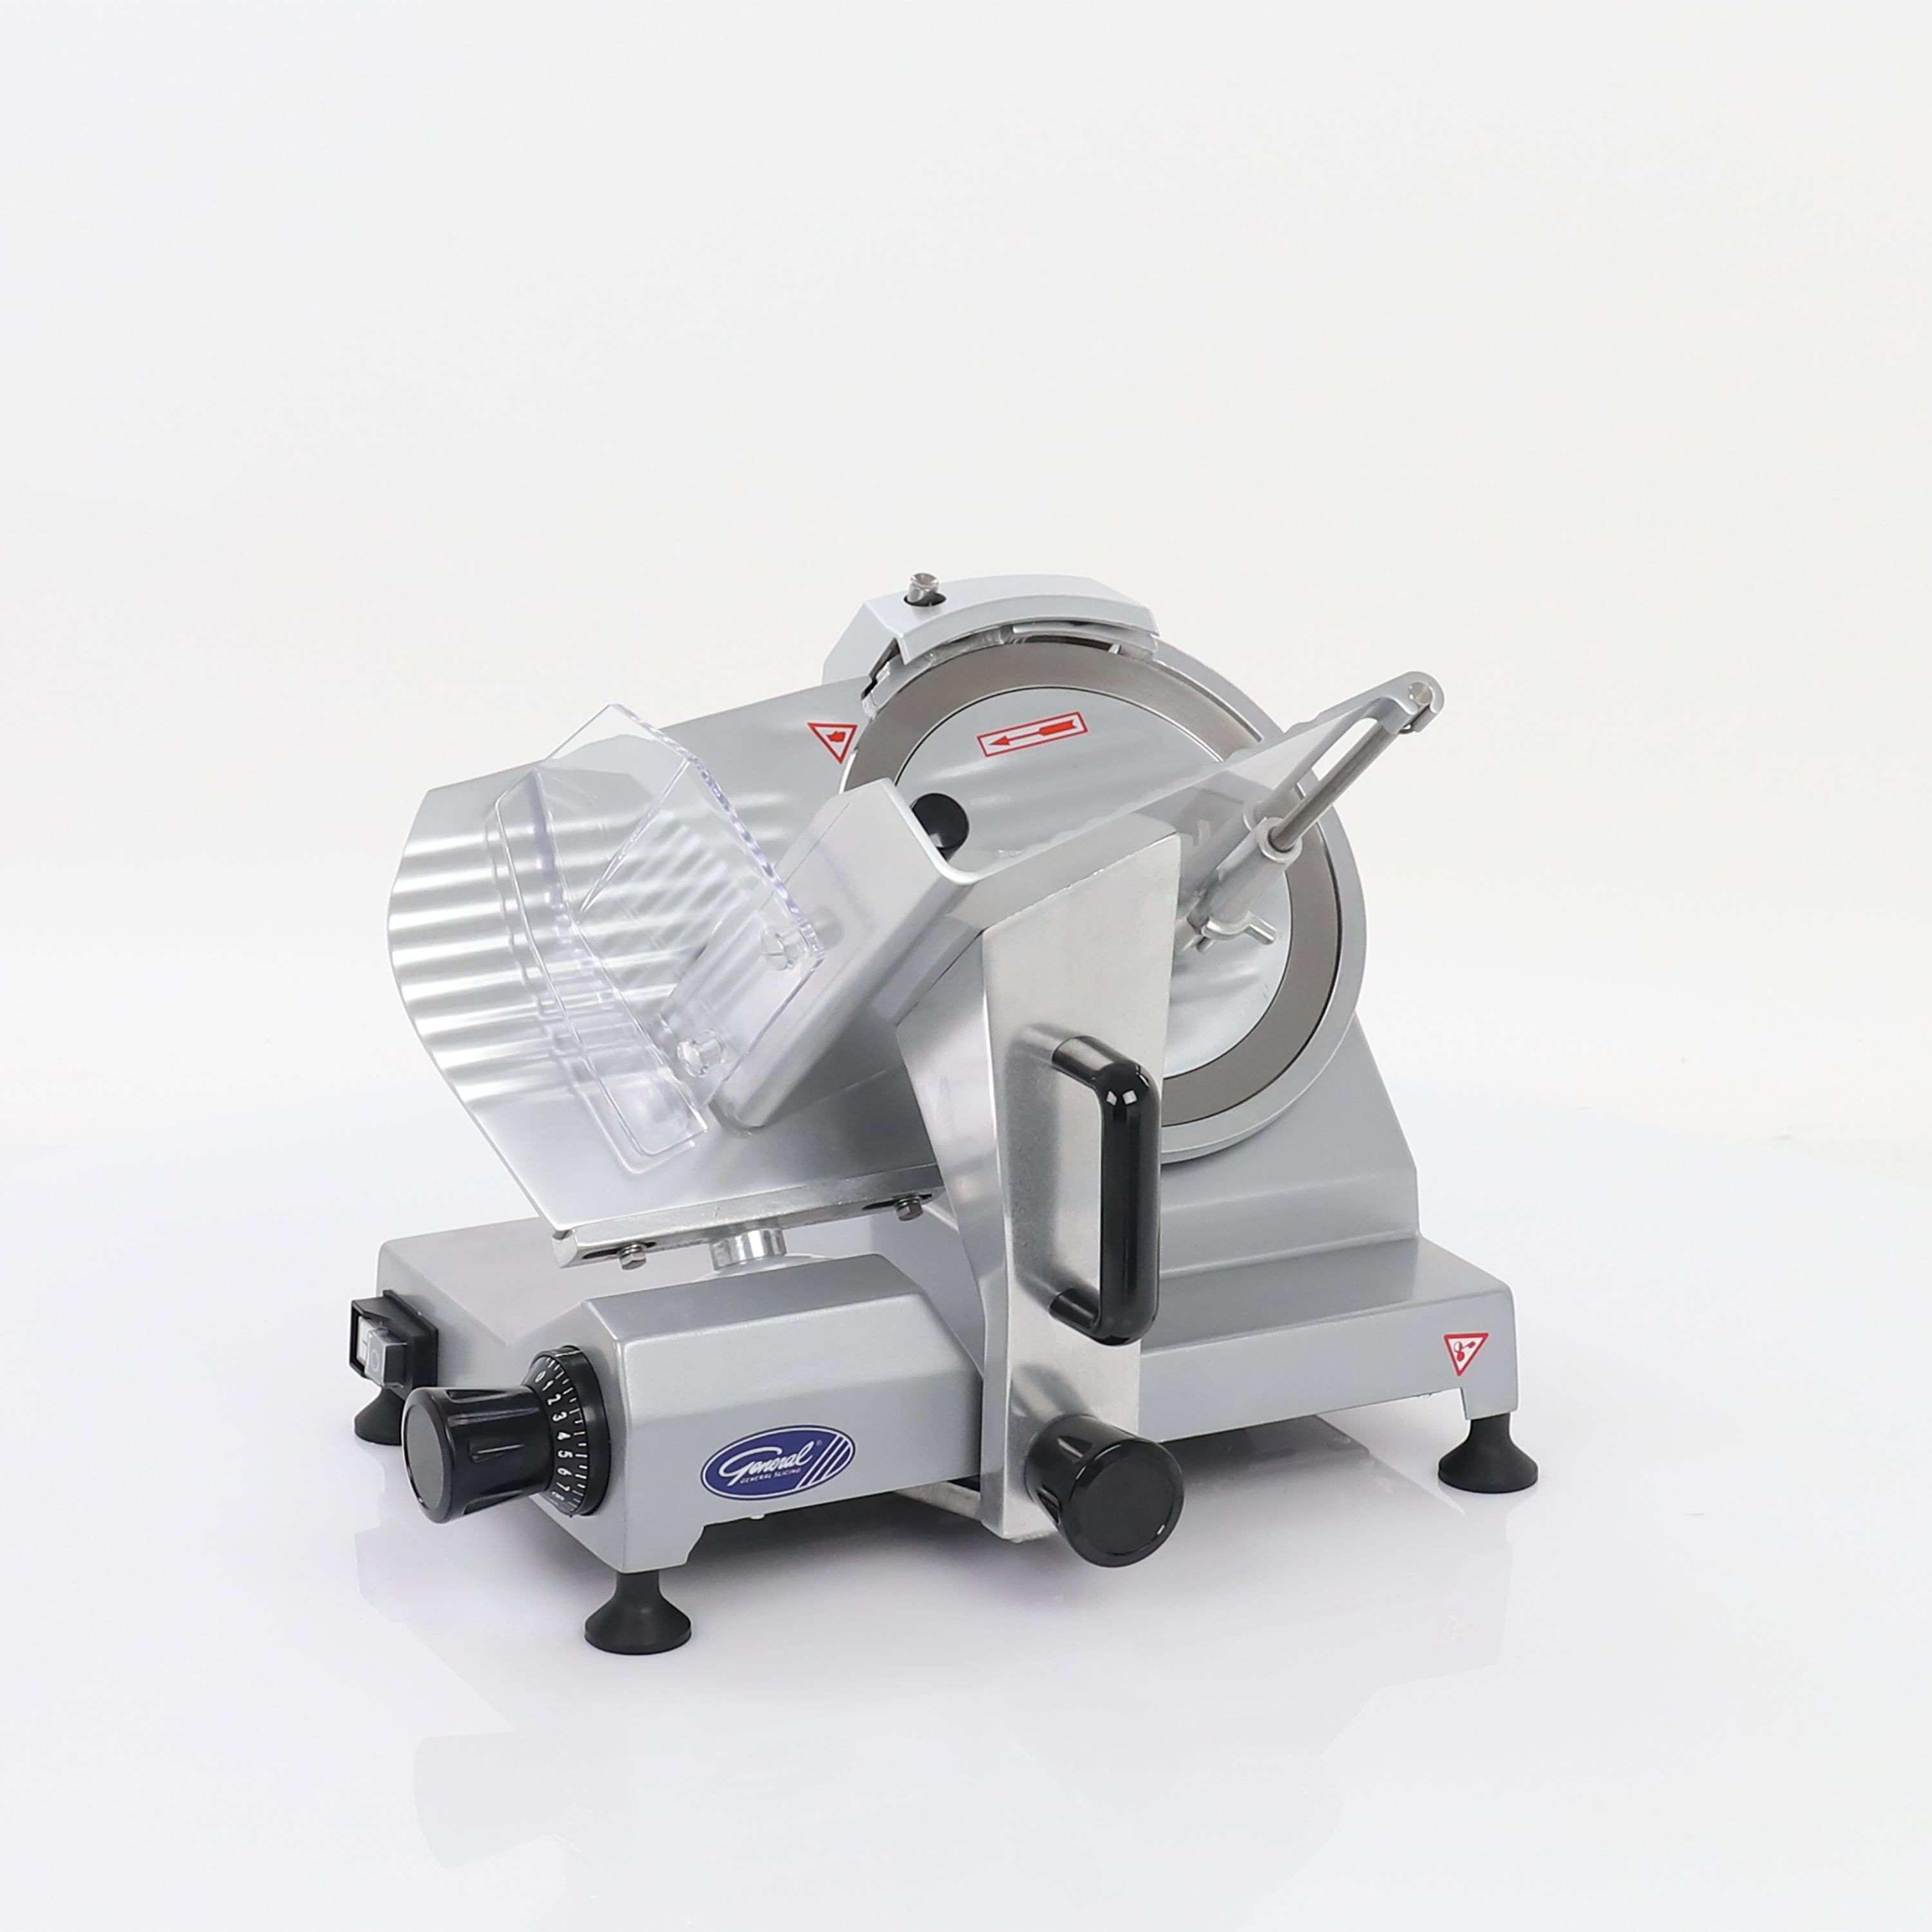 General - GSE009, General Foodservice Manual Commercial Food Slicer, 9 Inch Knife, Light Duty, in Stainless Steel